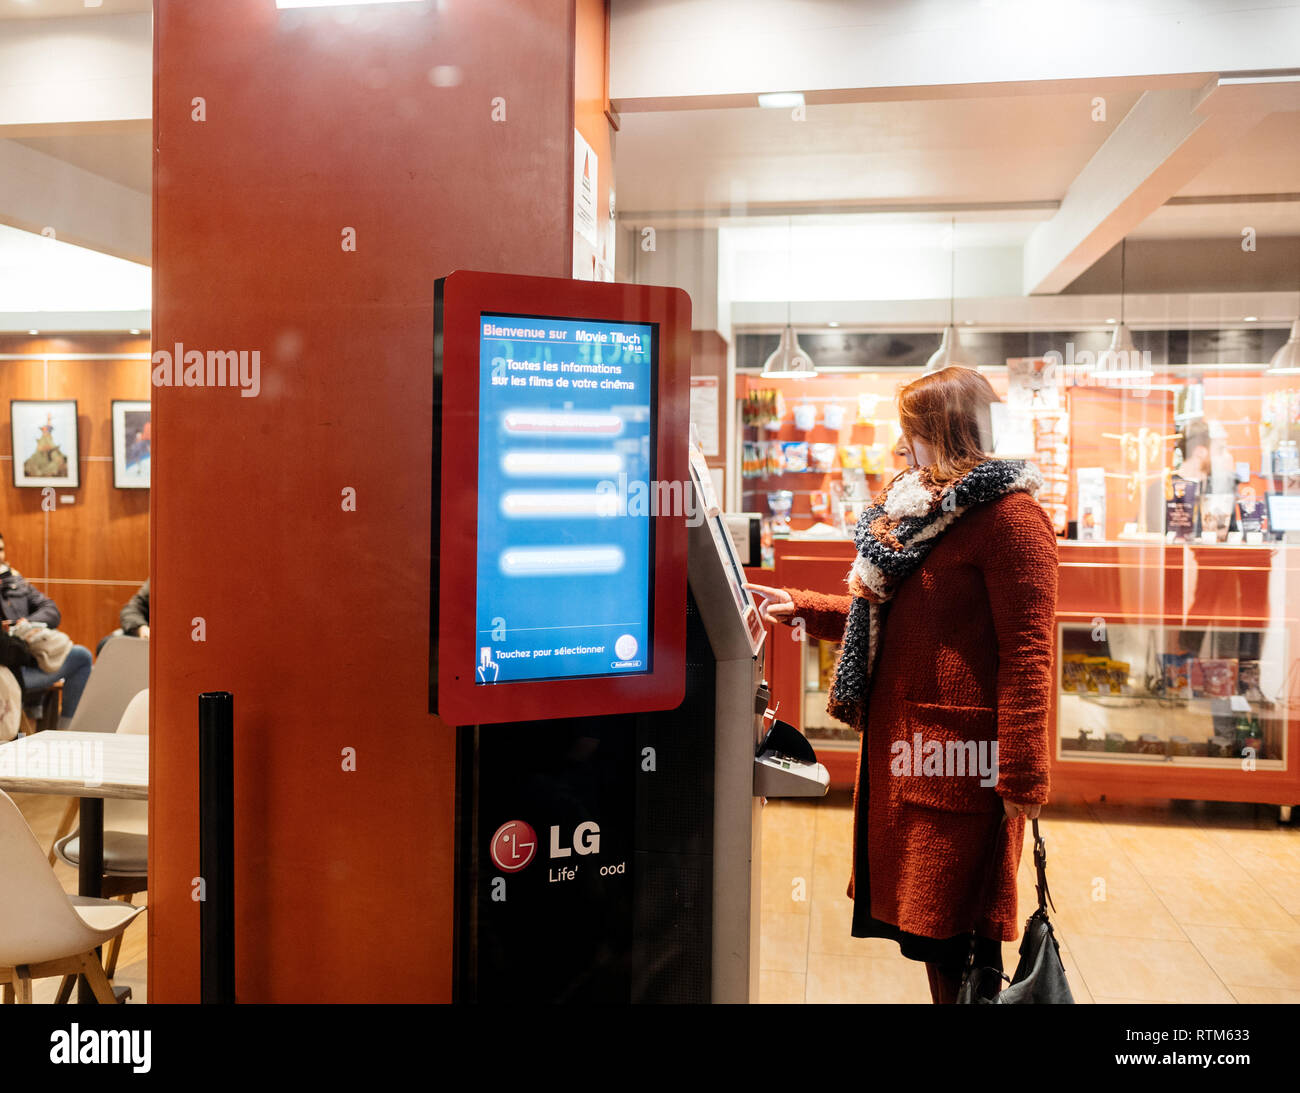 STRASBOURG, FRANCE - NOV 21, 2017: View from the street of single woman buying ticket from vending machine inside Cinema building  Stock Photo